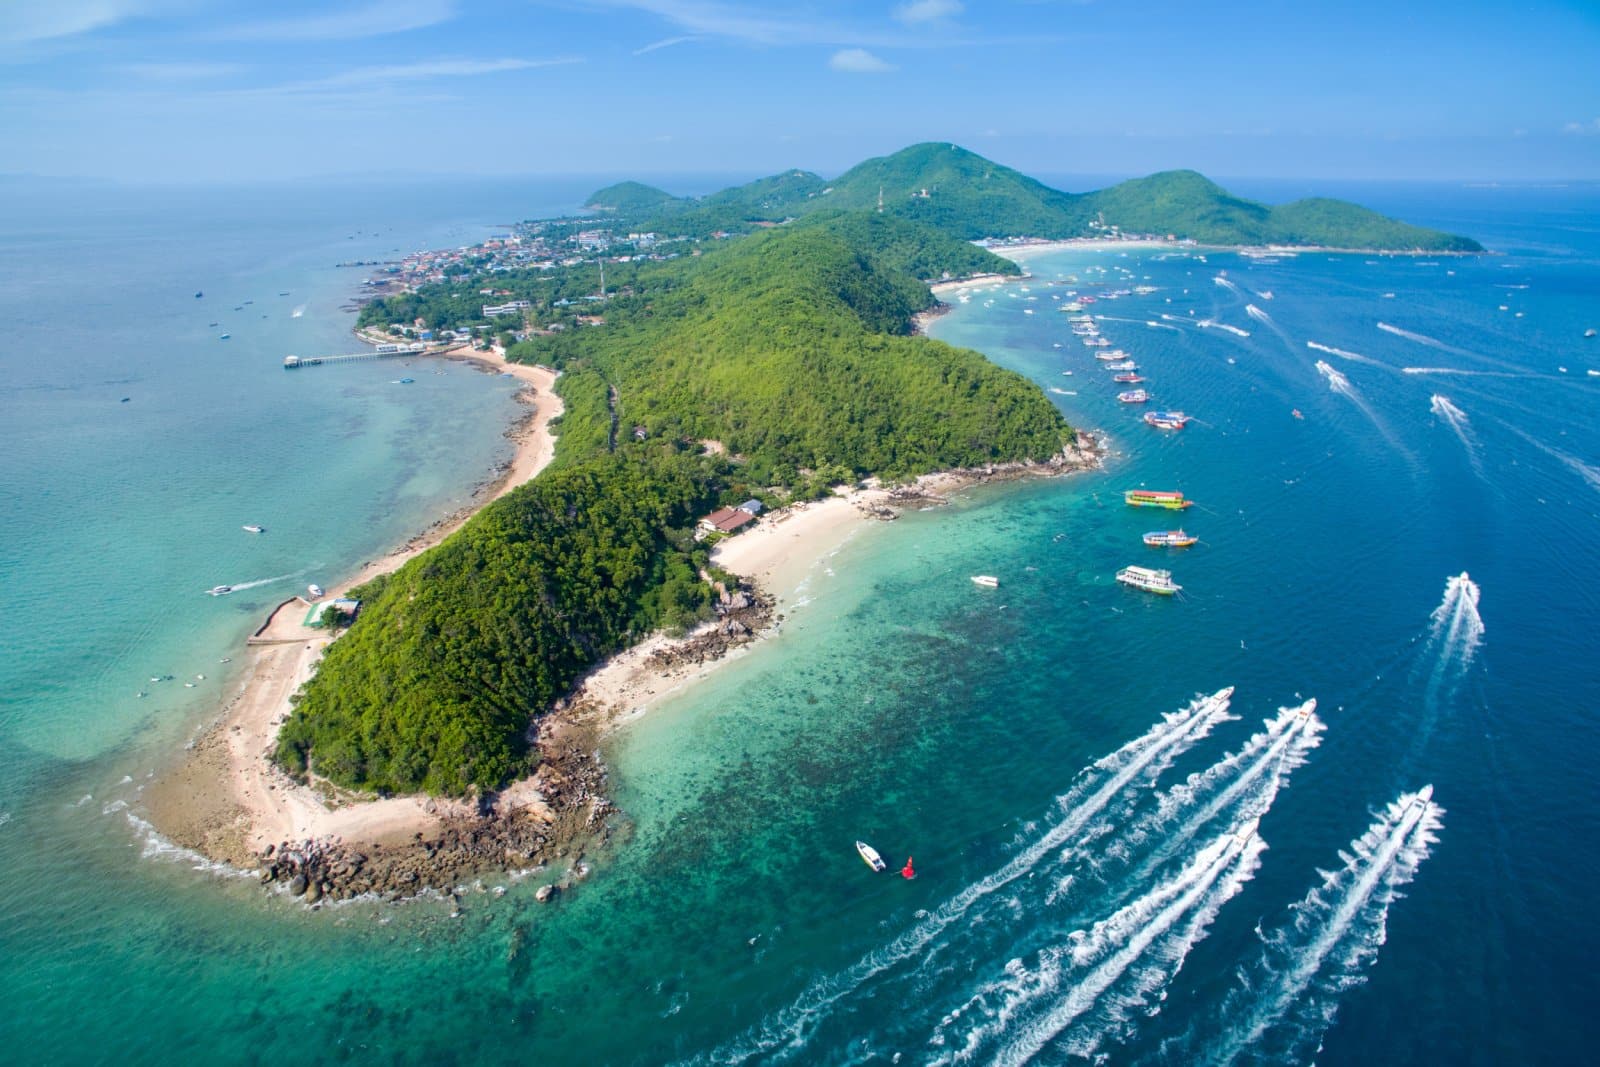 <p class="wp-caption-text">Image Credit: Shutterstock / sanchai buasong</p>  <p><span>Pattaya, located on the eastern Gulf coast of Thailand, is known for its stunning beaches, vibrant nightlife, and myriad entertainment options. Once a quiet fishing village, Pattaya has transformed into a bustling resort city that attracts millions of visitors each year. The city offers various activities for all ages, from water sports and theme parks to botanical gardens and cultural shows. Pattaya’s Walking Street is famous worldwide for its lively atmosphere, packed with bars, nightclubs, and restaurants. Beyond its reputation for nightlife, Pattaya is also home to tranquil spots like the Sanctuary of Truth, a magnificent wooden temple that showcases exquisite craftsmanship and philosophical teachings. The city’s tropical climate and warm weather year-round make it a popular destination for sun-seekers and adventure enthusiasts.</span></p> <p><b>Insider’s Tip:</b><span> For a more serene experience, visit the nearby Coral Island (Koh Larn), accessible by a short ferry ride from Pattaya. The island offers beautiful beaches with clearer water and a more relaxed atmosphere than the mainland.</span></p> <p><b>When to Travel:</b><span> November to February for cooler and dryer weather.</span></p> <p><b>How to Get There:</b><span> The nearest airport is U-Tapao Rayong-Pattaya International Airport (UTP), or travel by car or bus from Bangkok, approximately 2 hours away.</span></p>